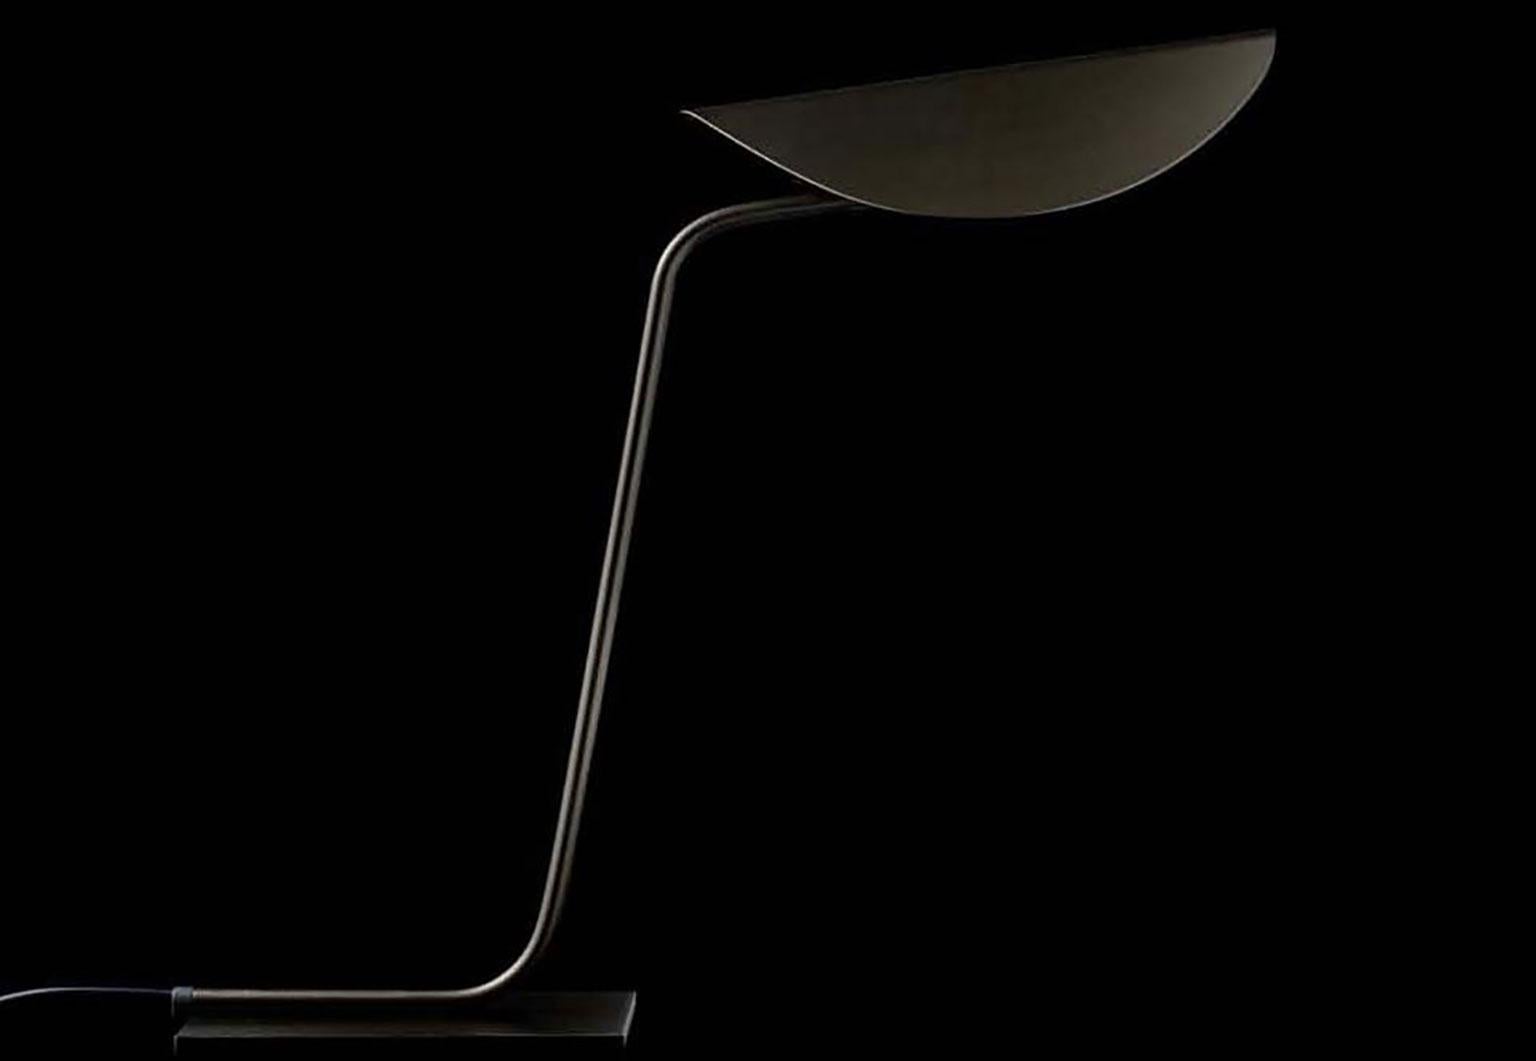 Plume anodic bronze table lamp designed by Christophe Pillet for Oluce. This work of designer Christophe Pillet defines the clarity of appearance and search for simplicity. As part of a familiy, this lamp conceptually originated from a collection